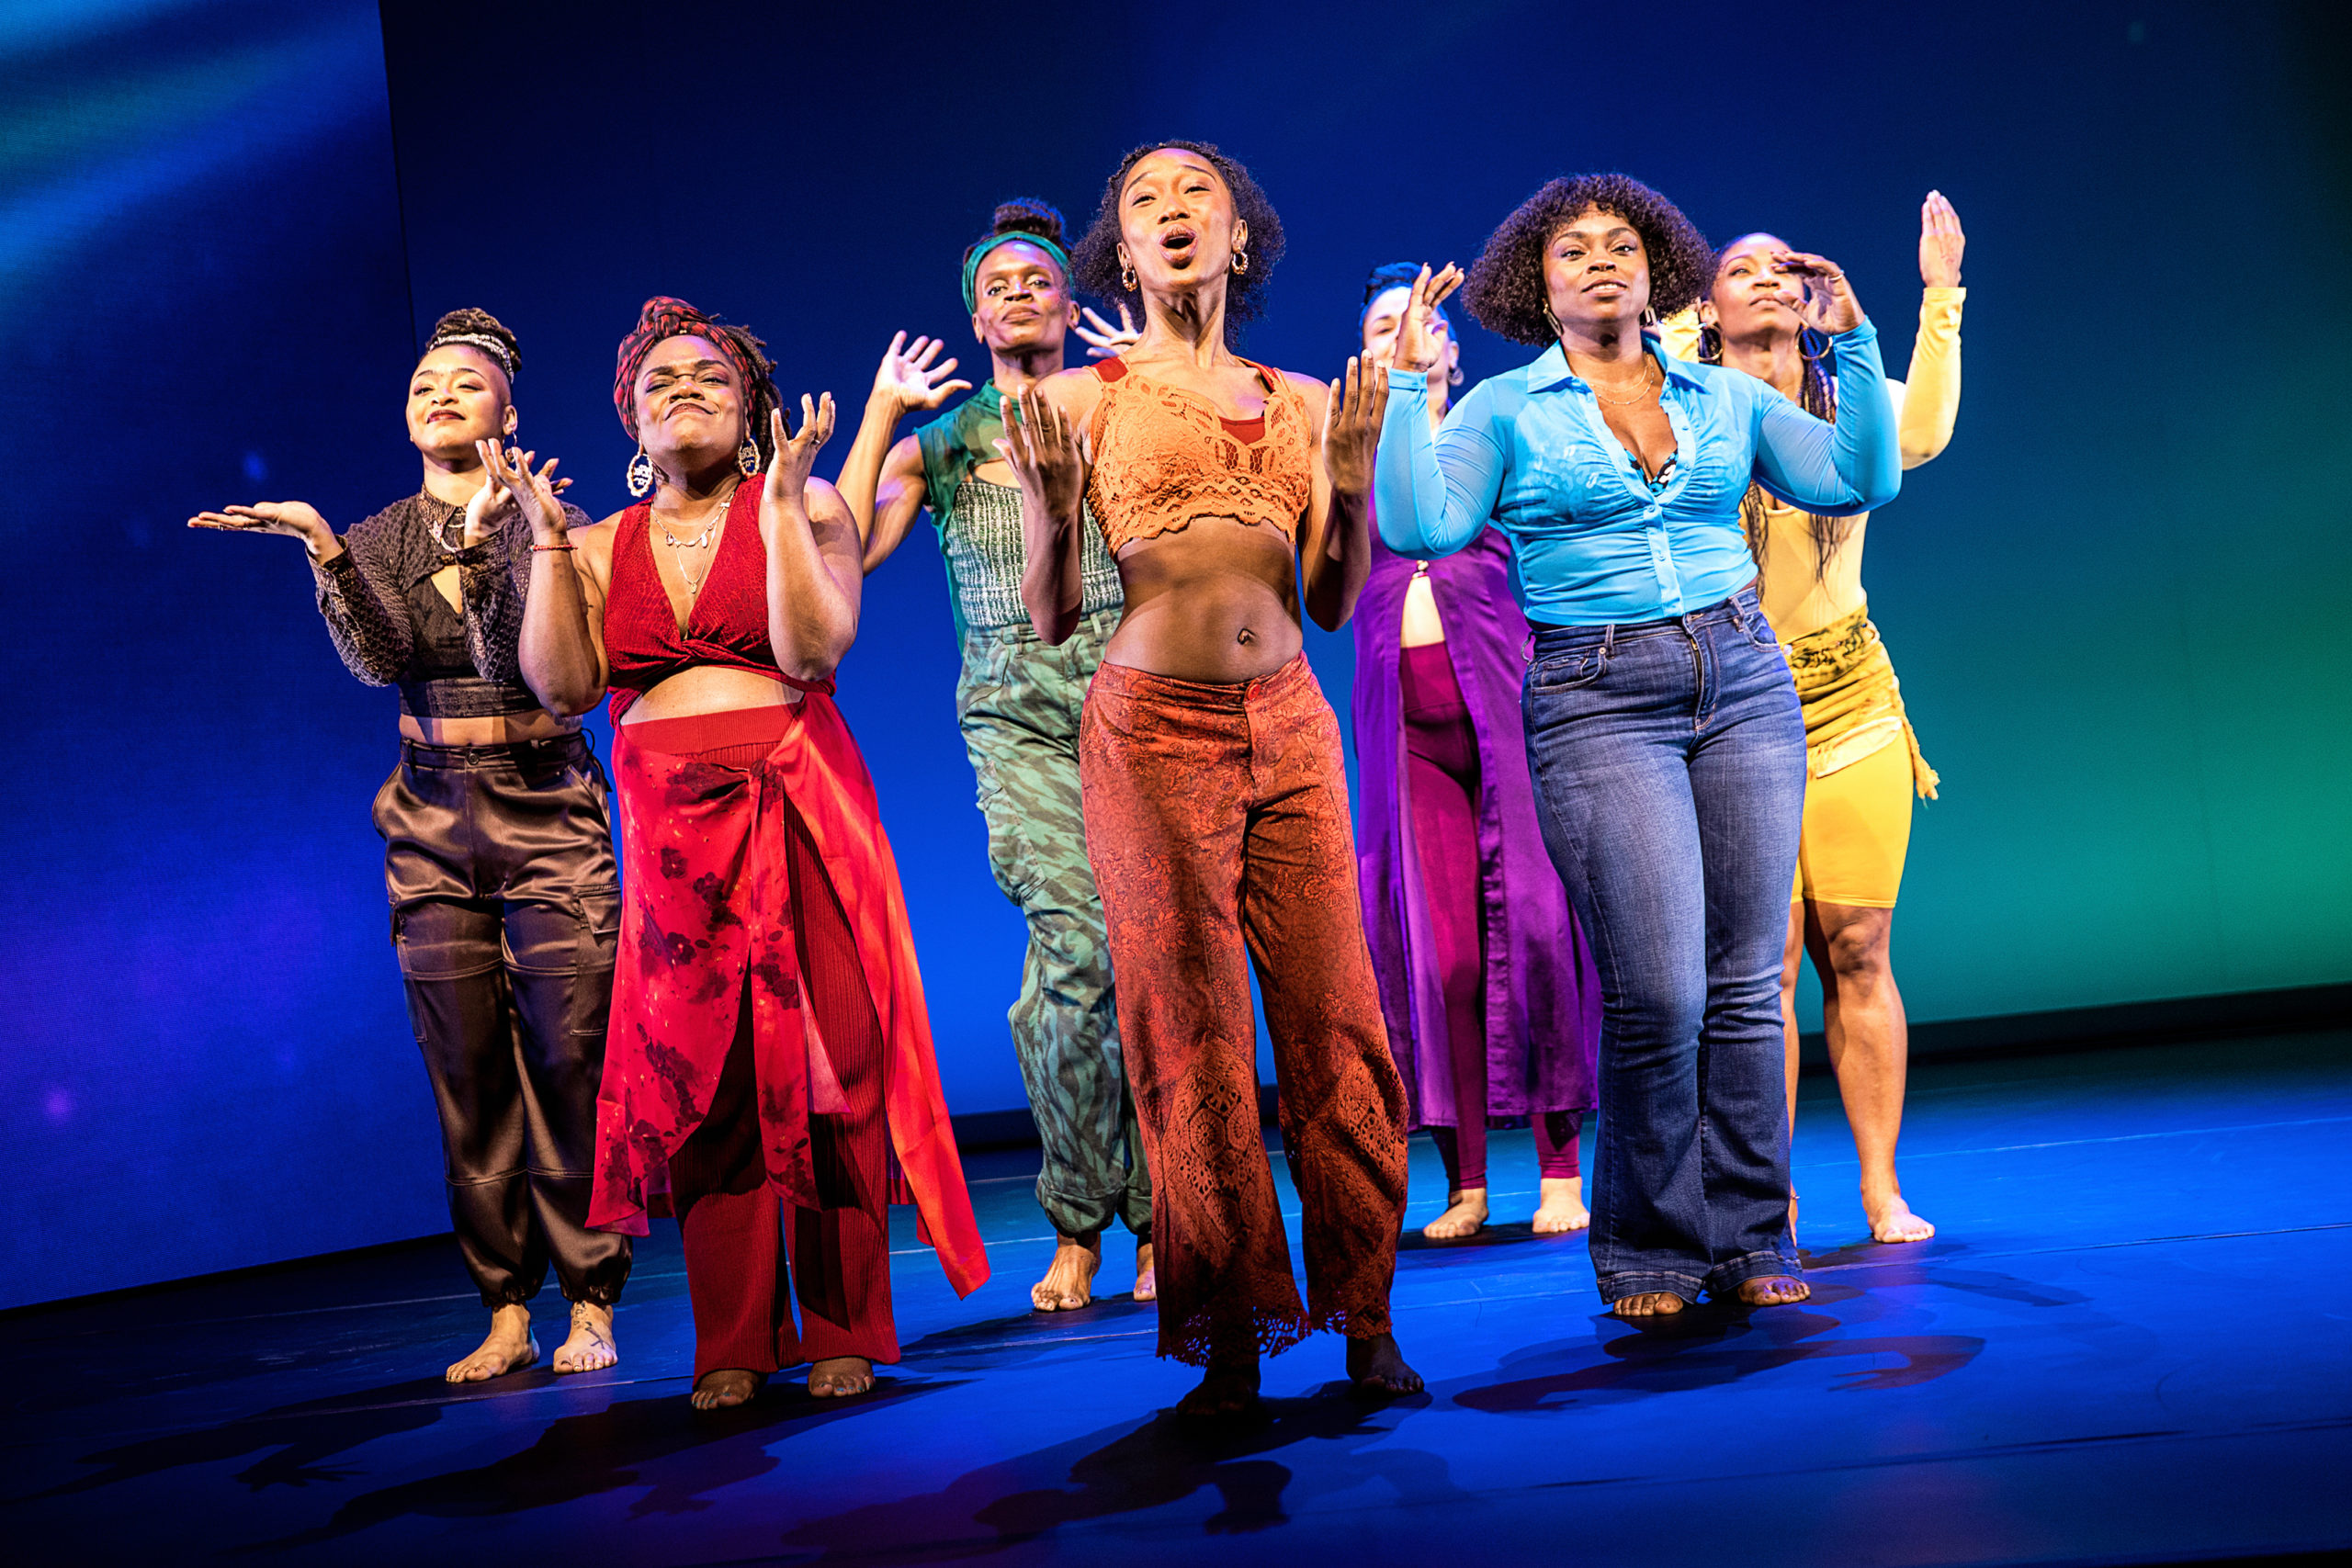 The cast of "for colored girls" are seven Black women, each costumed in a different color of the rainbow, and they stand facing the camera, dancing and singing in unison.